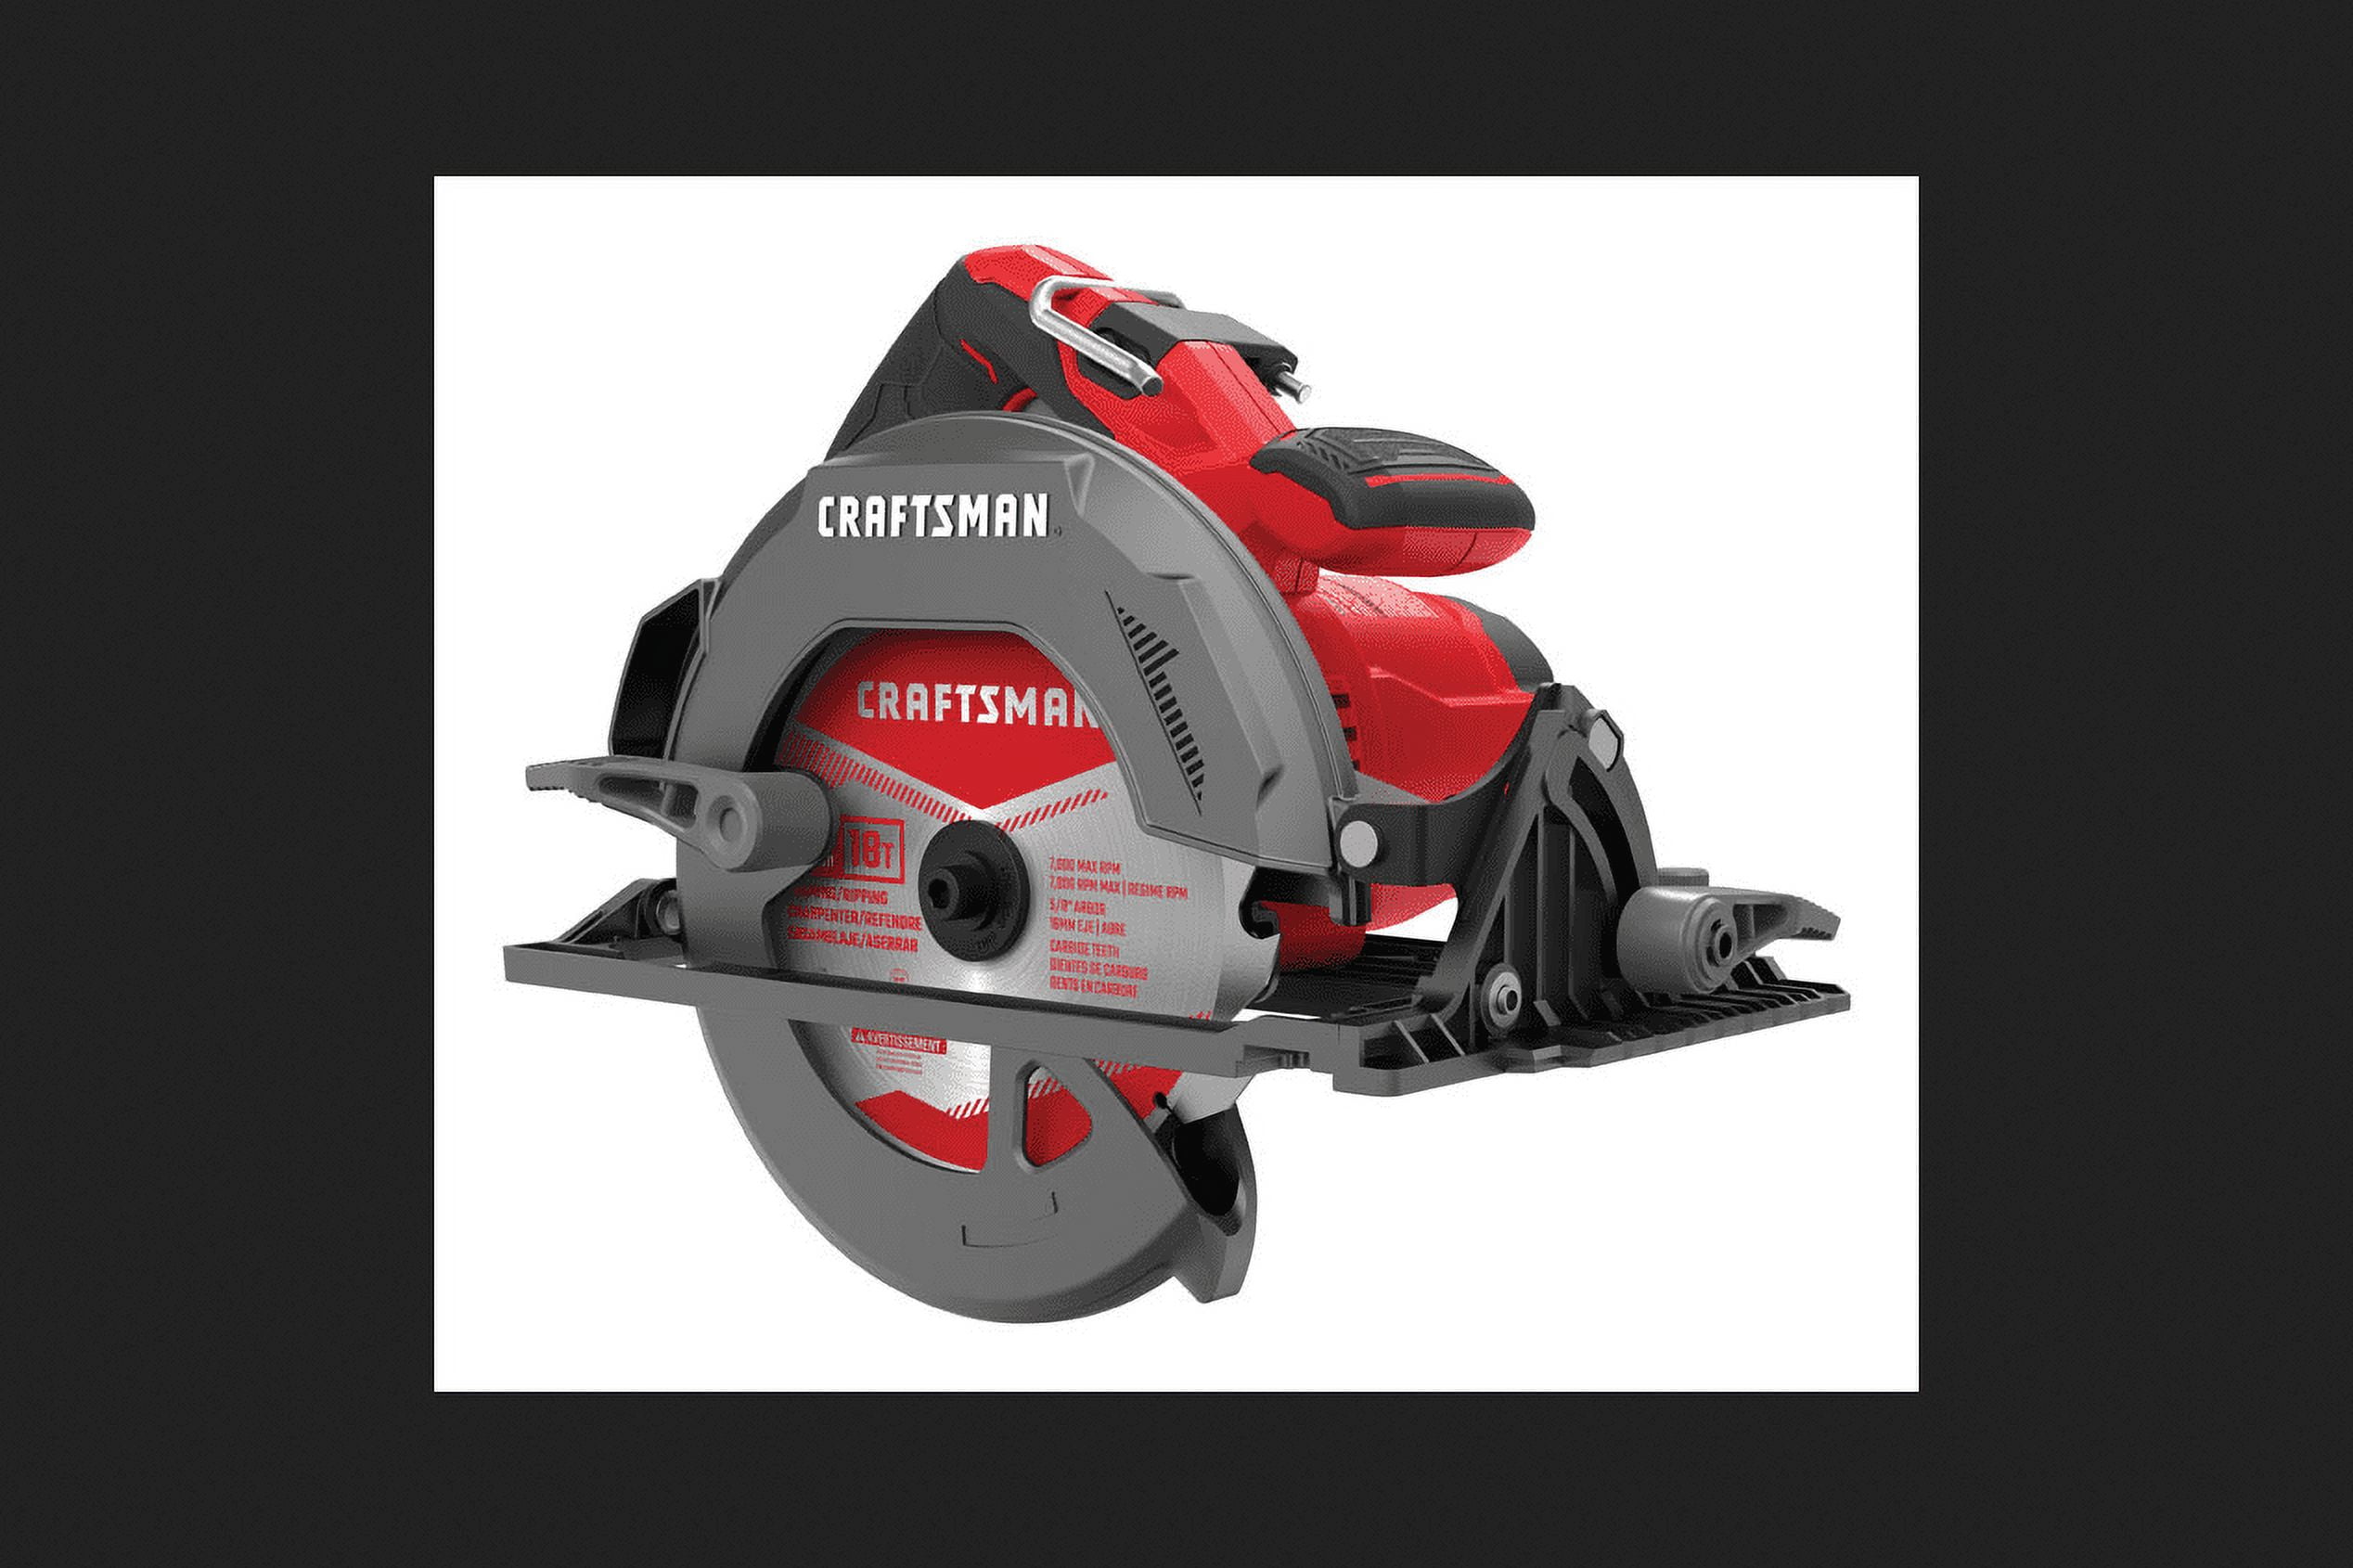 Craftsman 7-1/4 in. 15 amps Corded Lightweight Circular Saw 5500 rpm 11.15  lb. Red